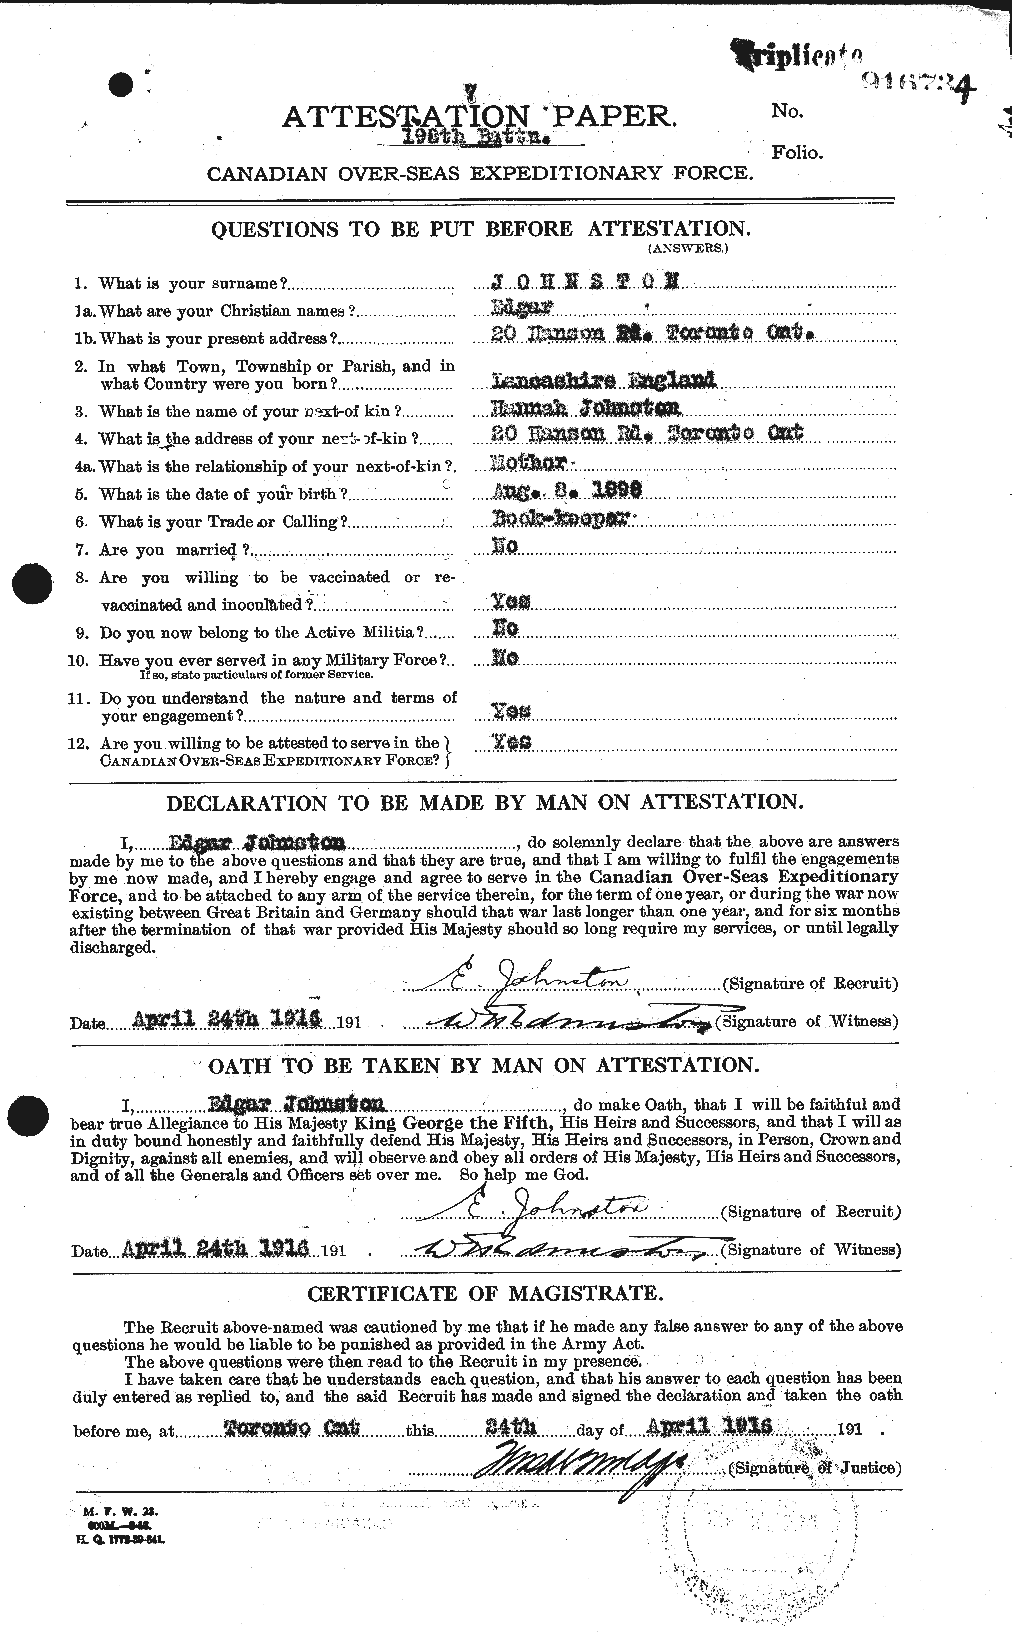 Personnel Records of the First World War - CEF 423203a